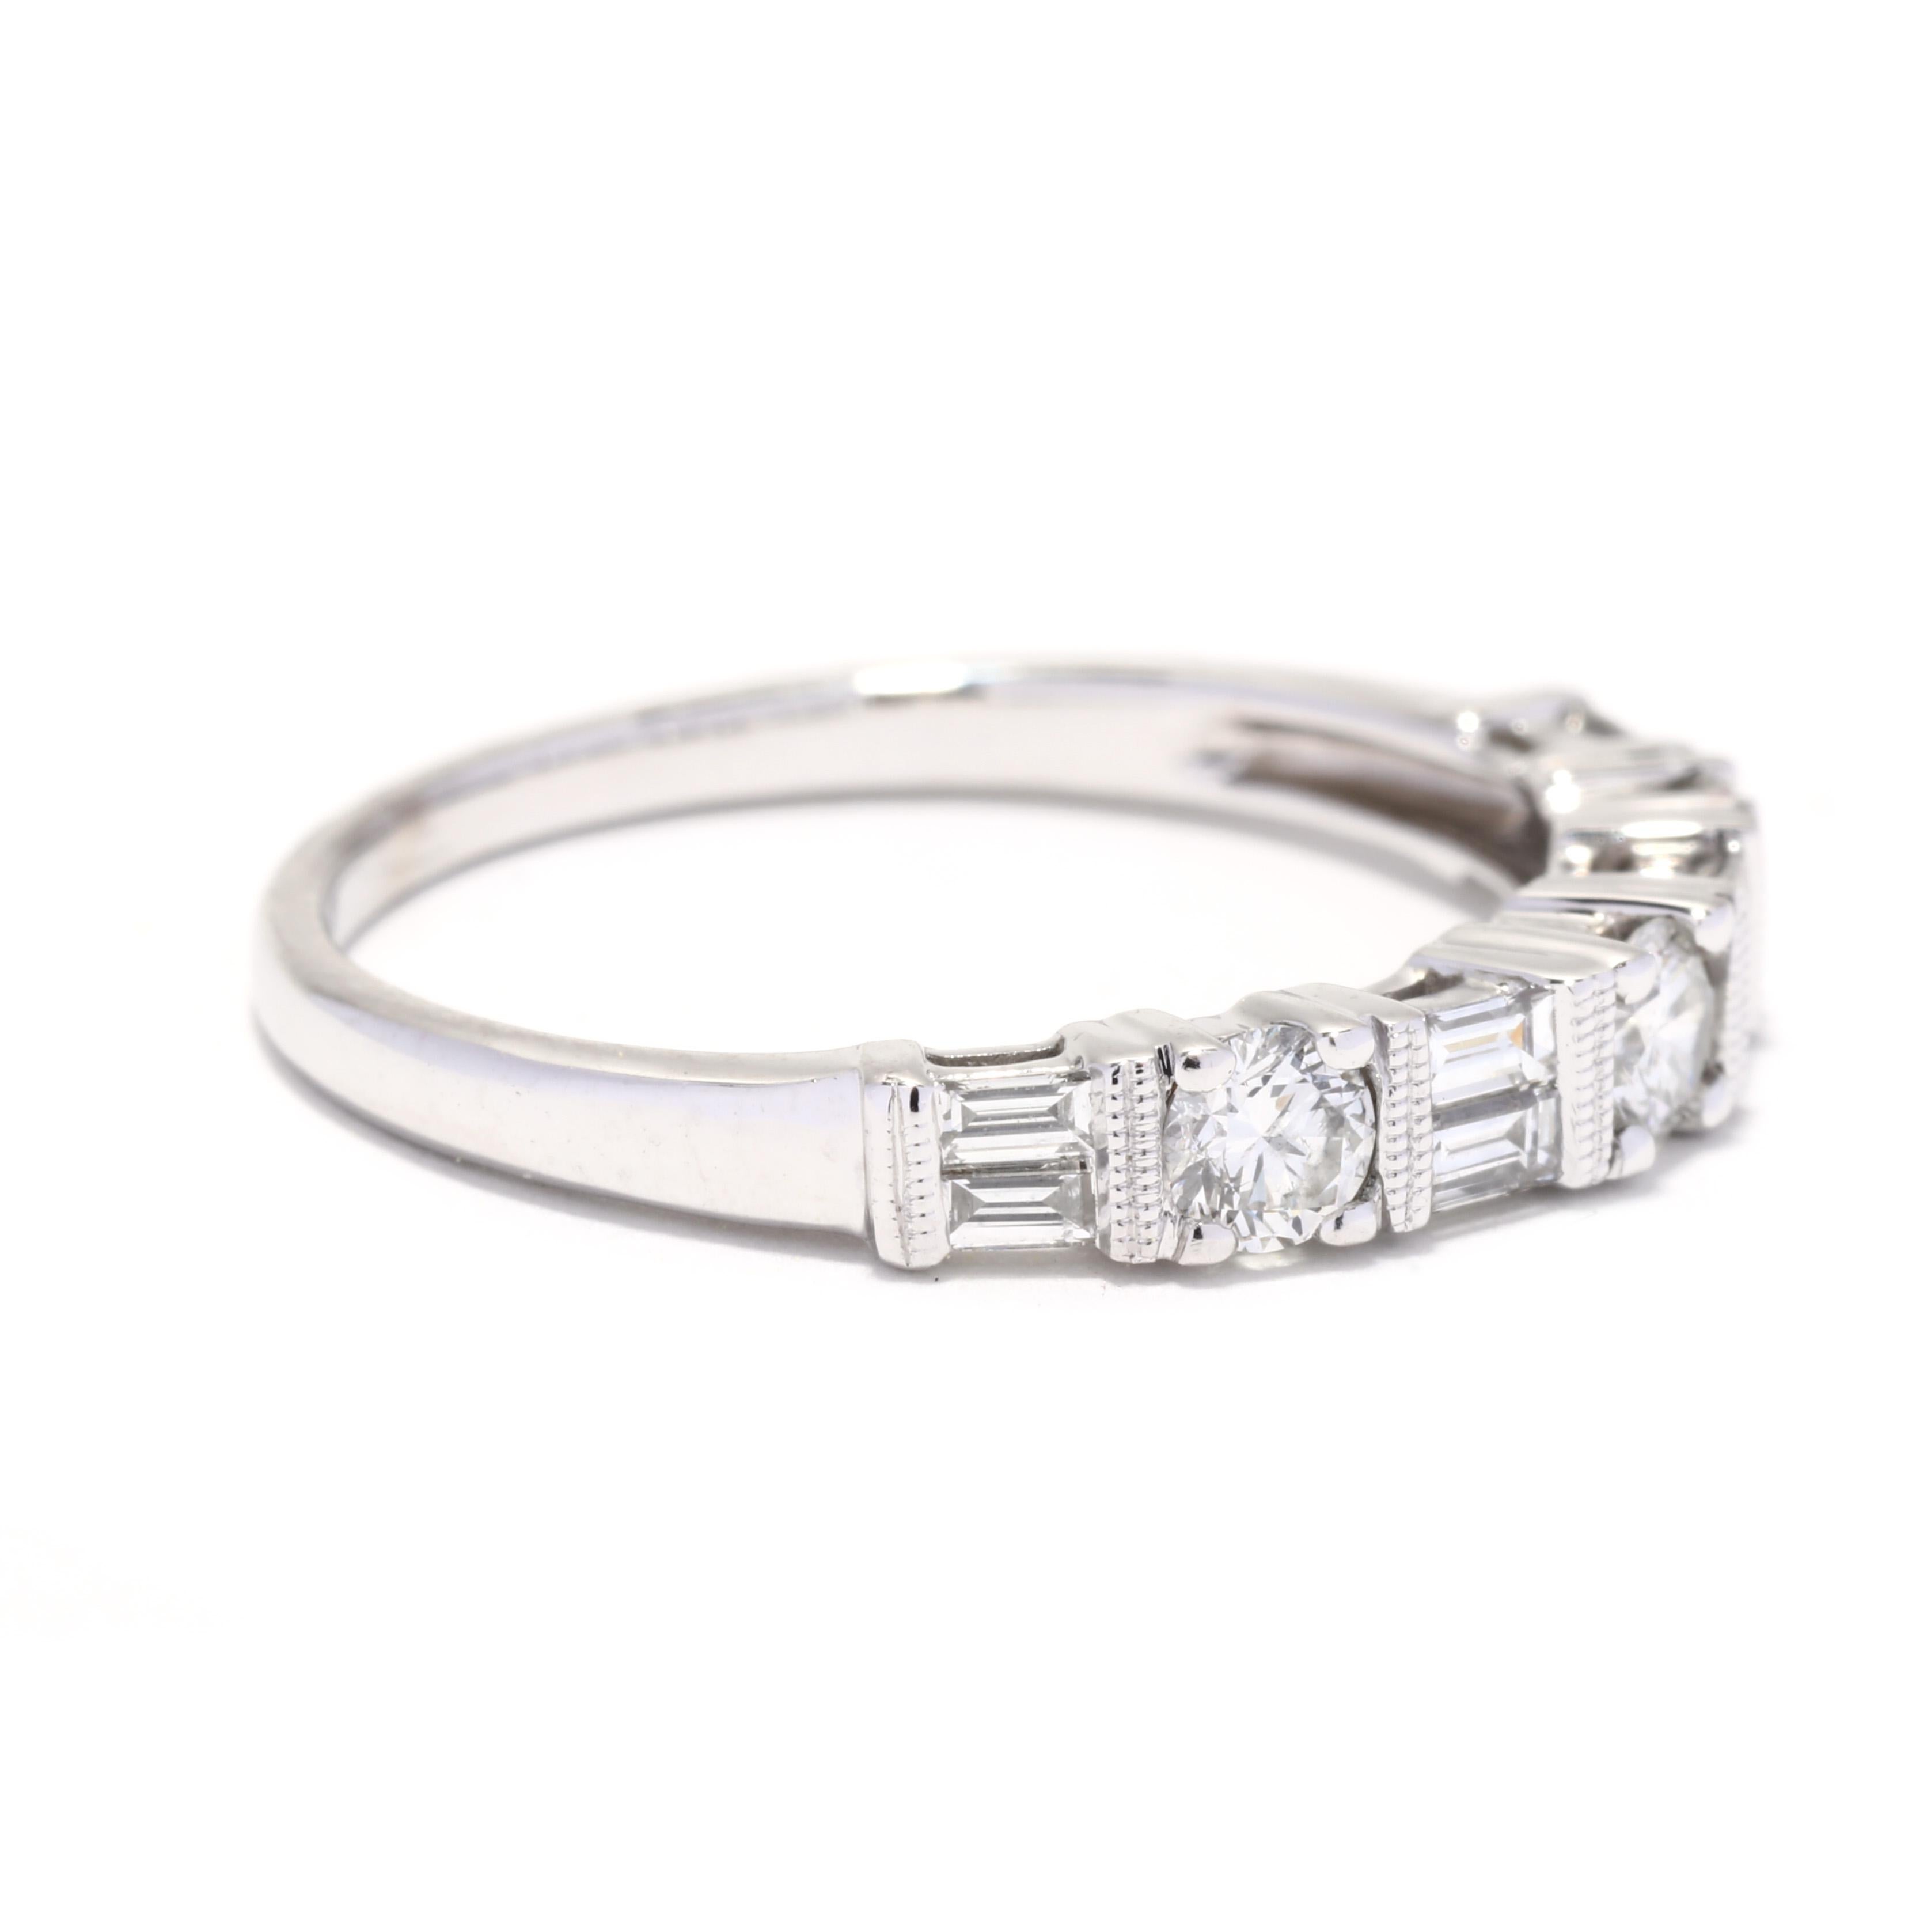 A vintage 14 karat white gold baguette and round brilliant cut diamond stackable band ring. This ring features alternating round brilliant cut and baguette cut diamonds weighing approximately .80 total carats and with a thin tapered band.

Stones:
-